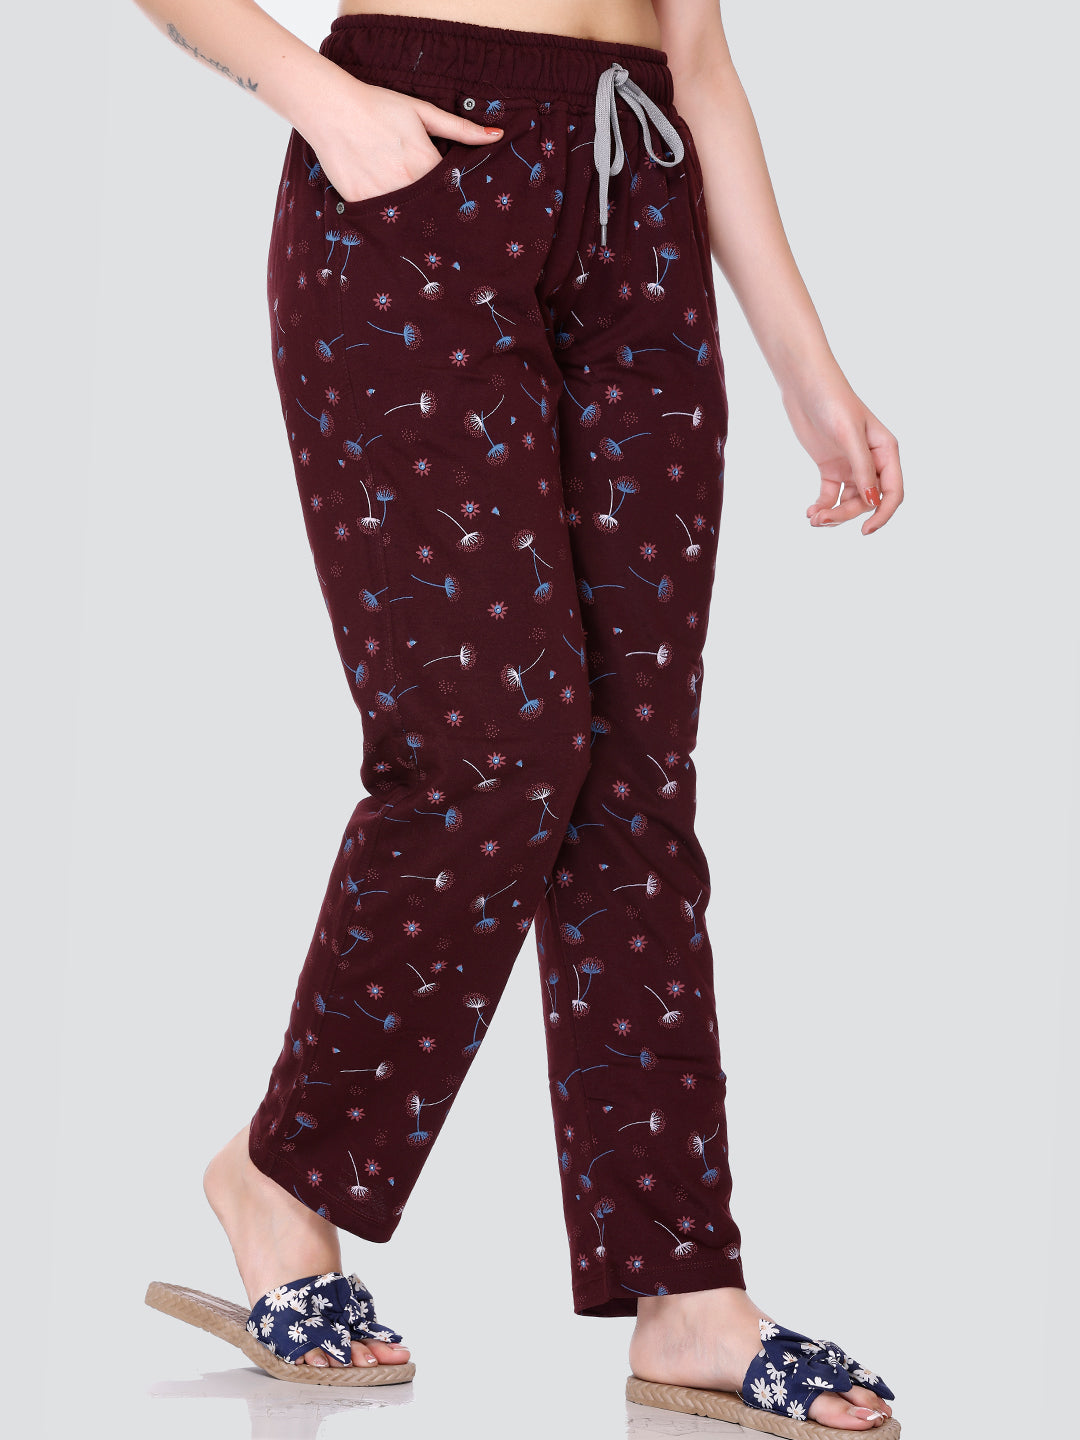 Cupid All Over Print Cotton Lounge Pants for Women ( Wine)